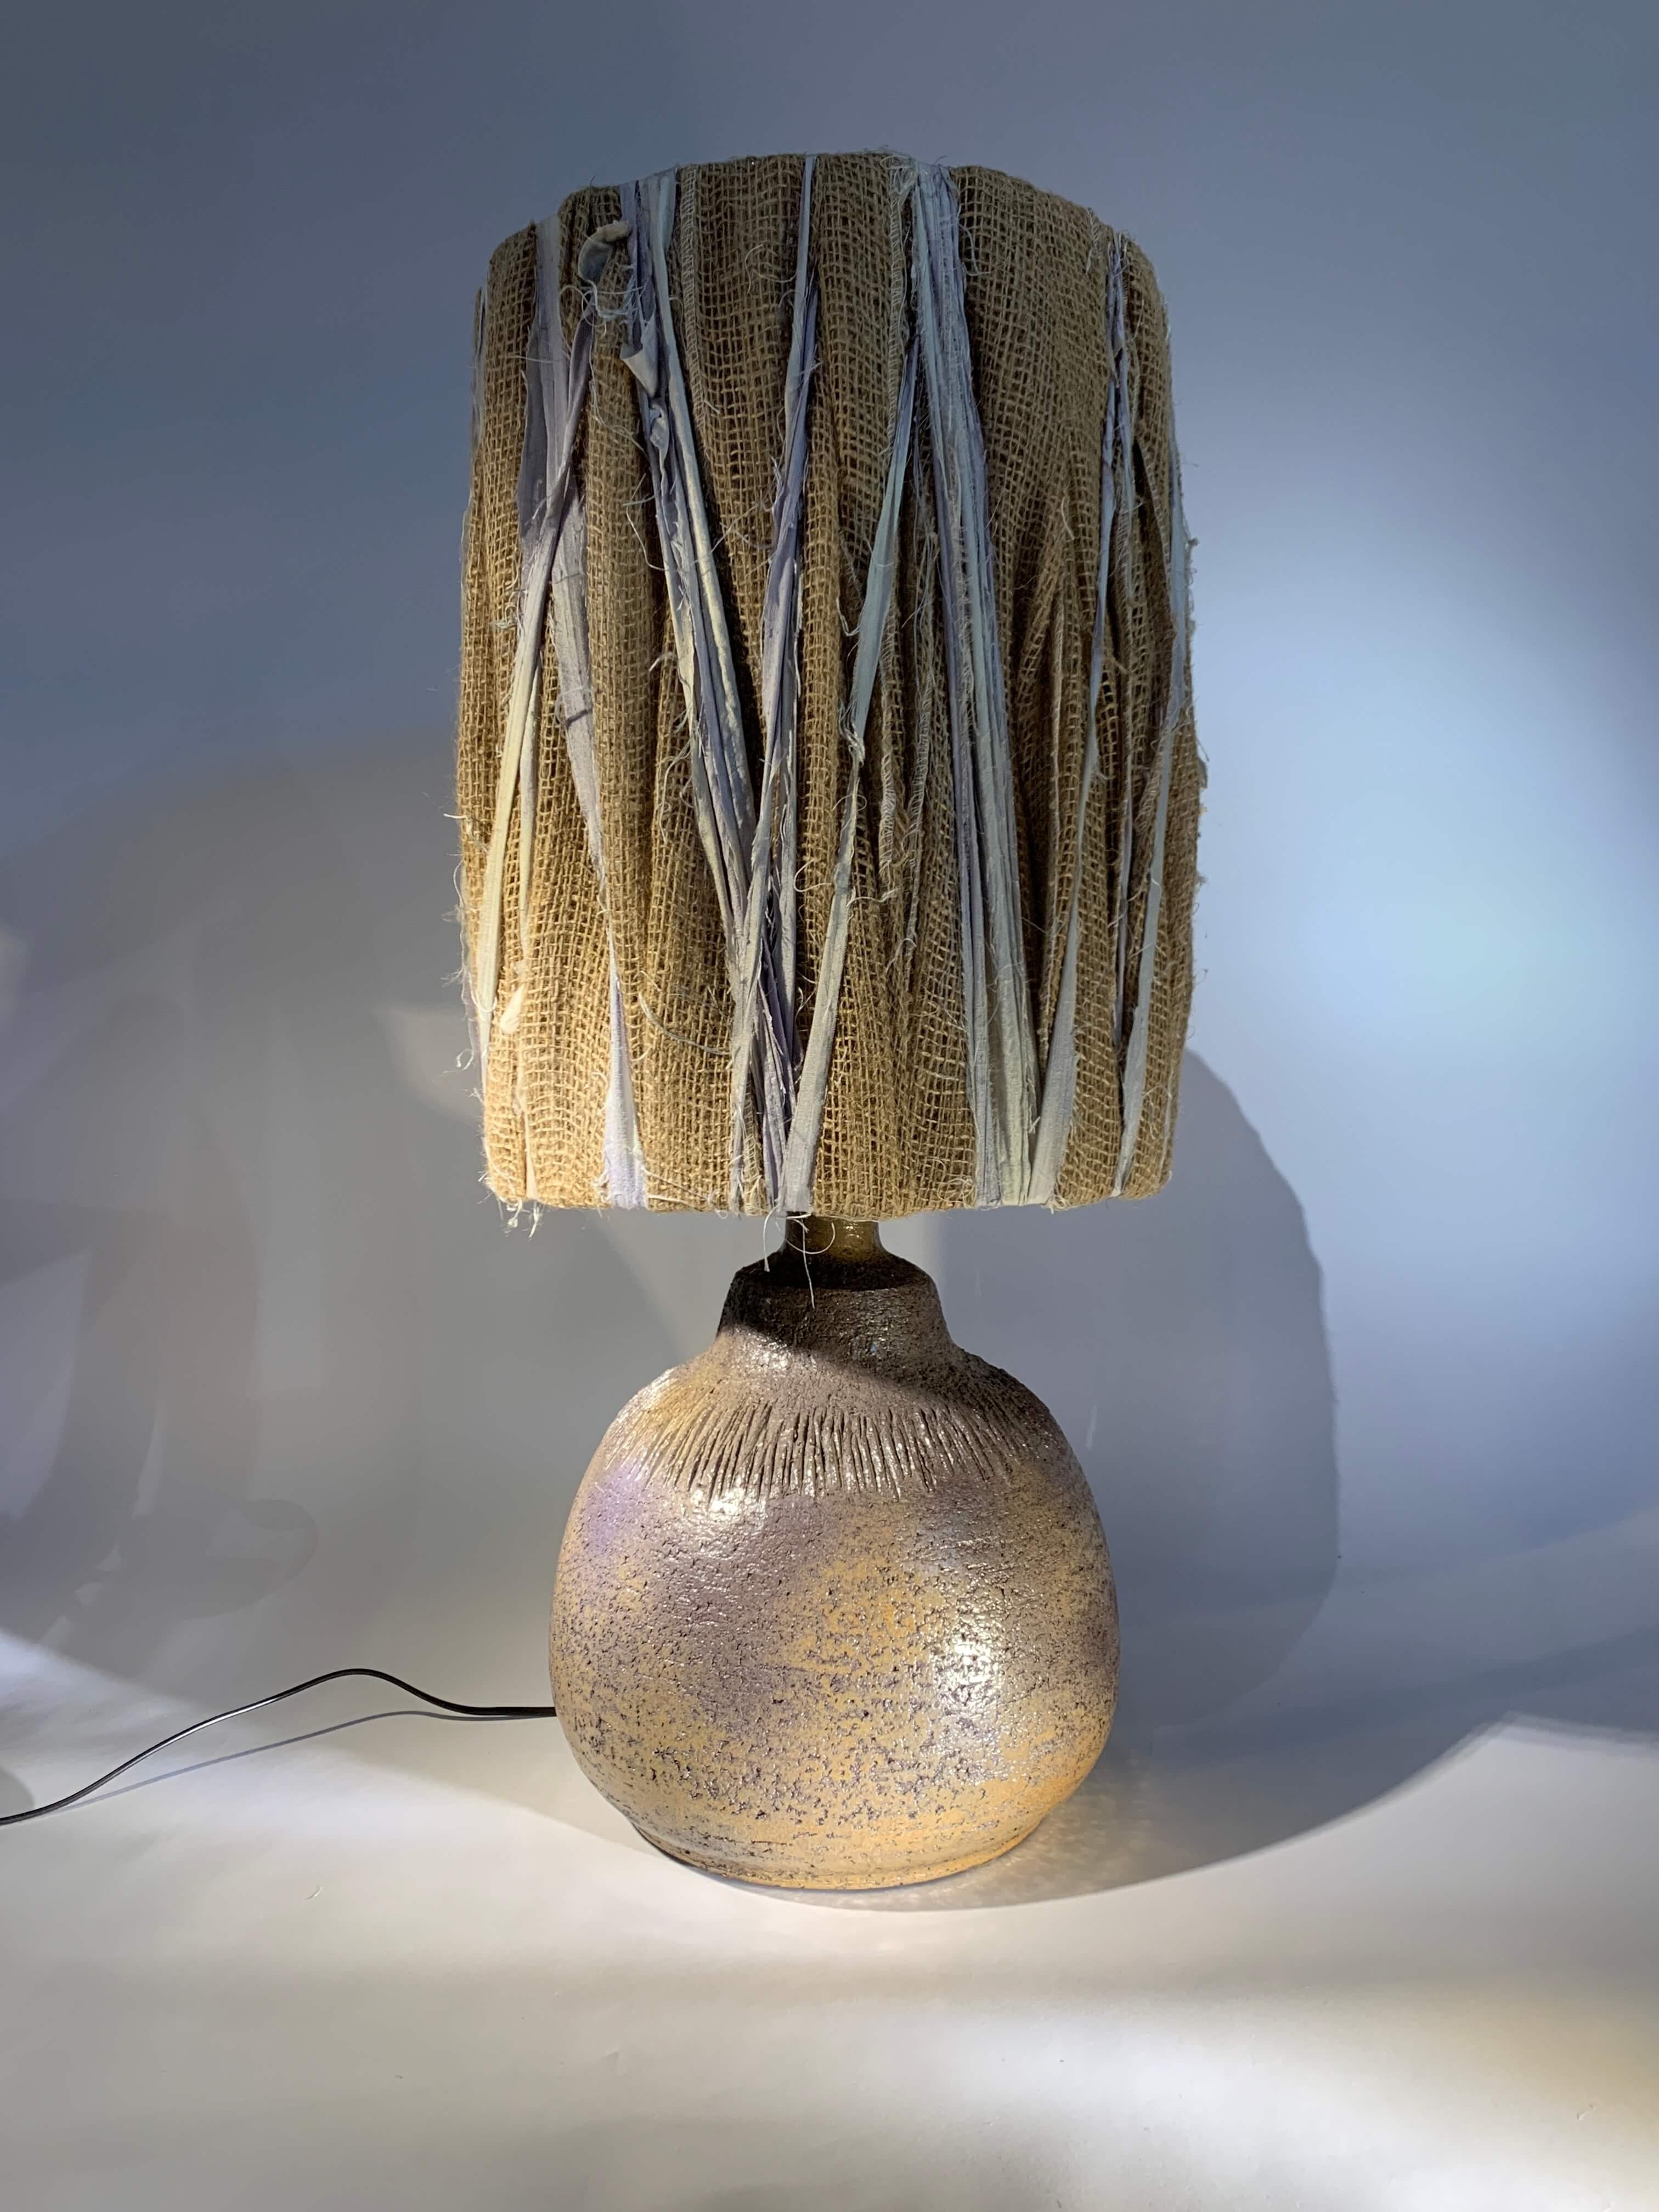 Exceptional French ceramic table lamp by Huguette Bessone.
Lamp base in chamotte earth, circular and generous body with incised decoration.
This ceramic, whose shape and decoration are unusual for the artist, is also interesting for its brown color